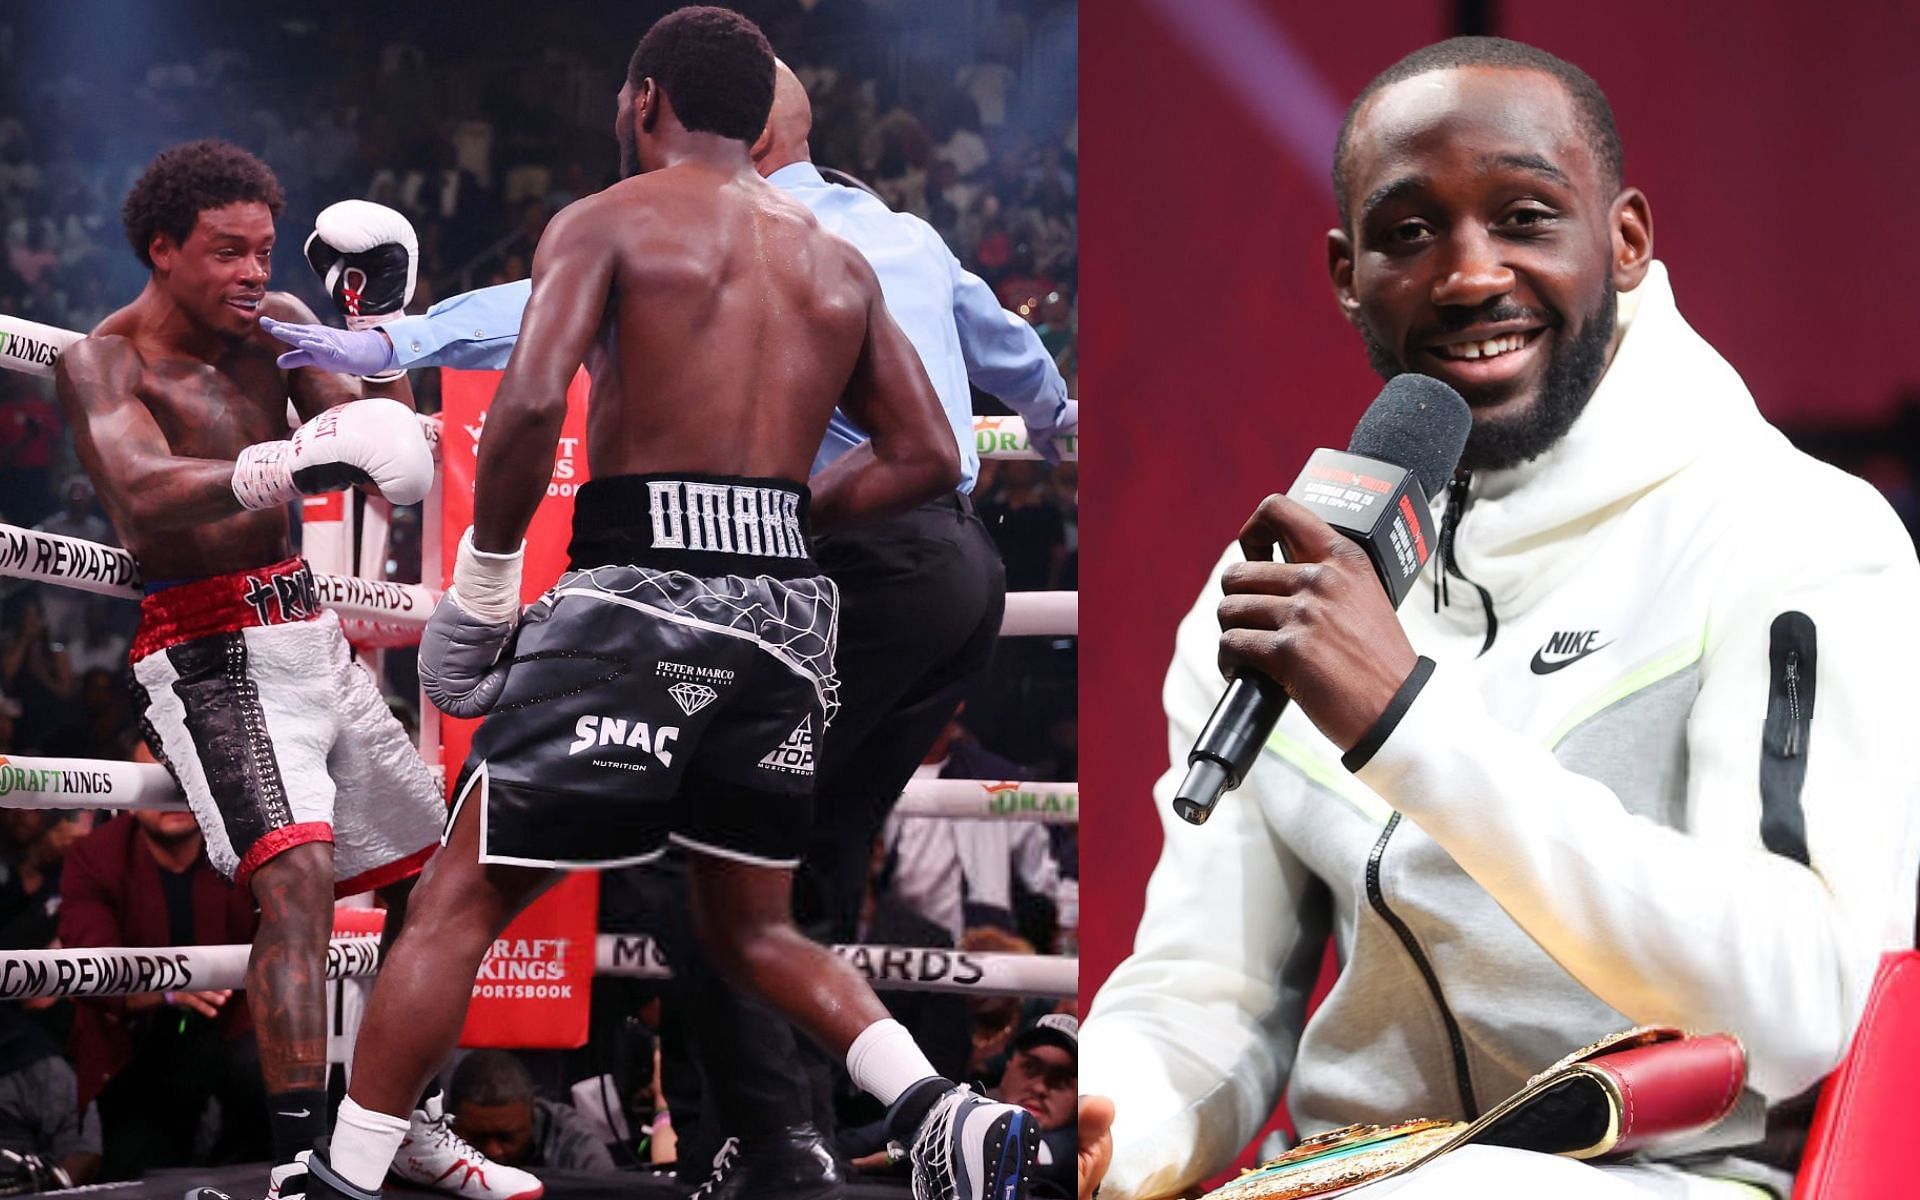 Errol Spence Jr. being stopped by Terence Crawford (left) and Crawford (right) [Images Courtesy: @GettyImages]